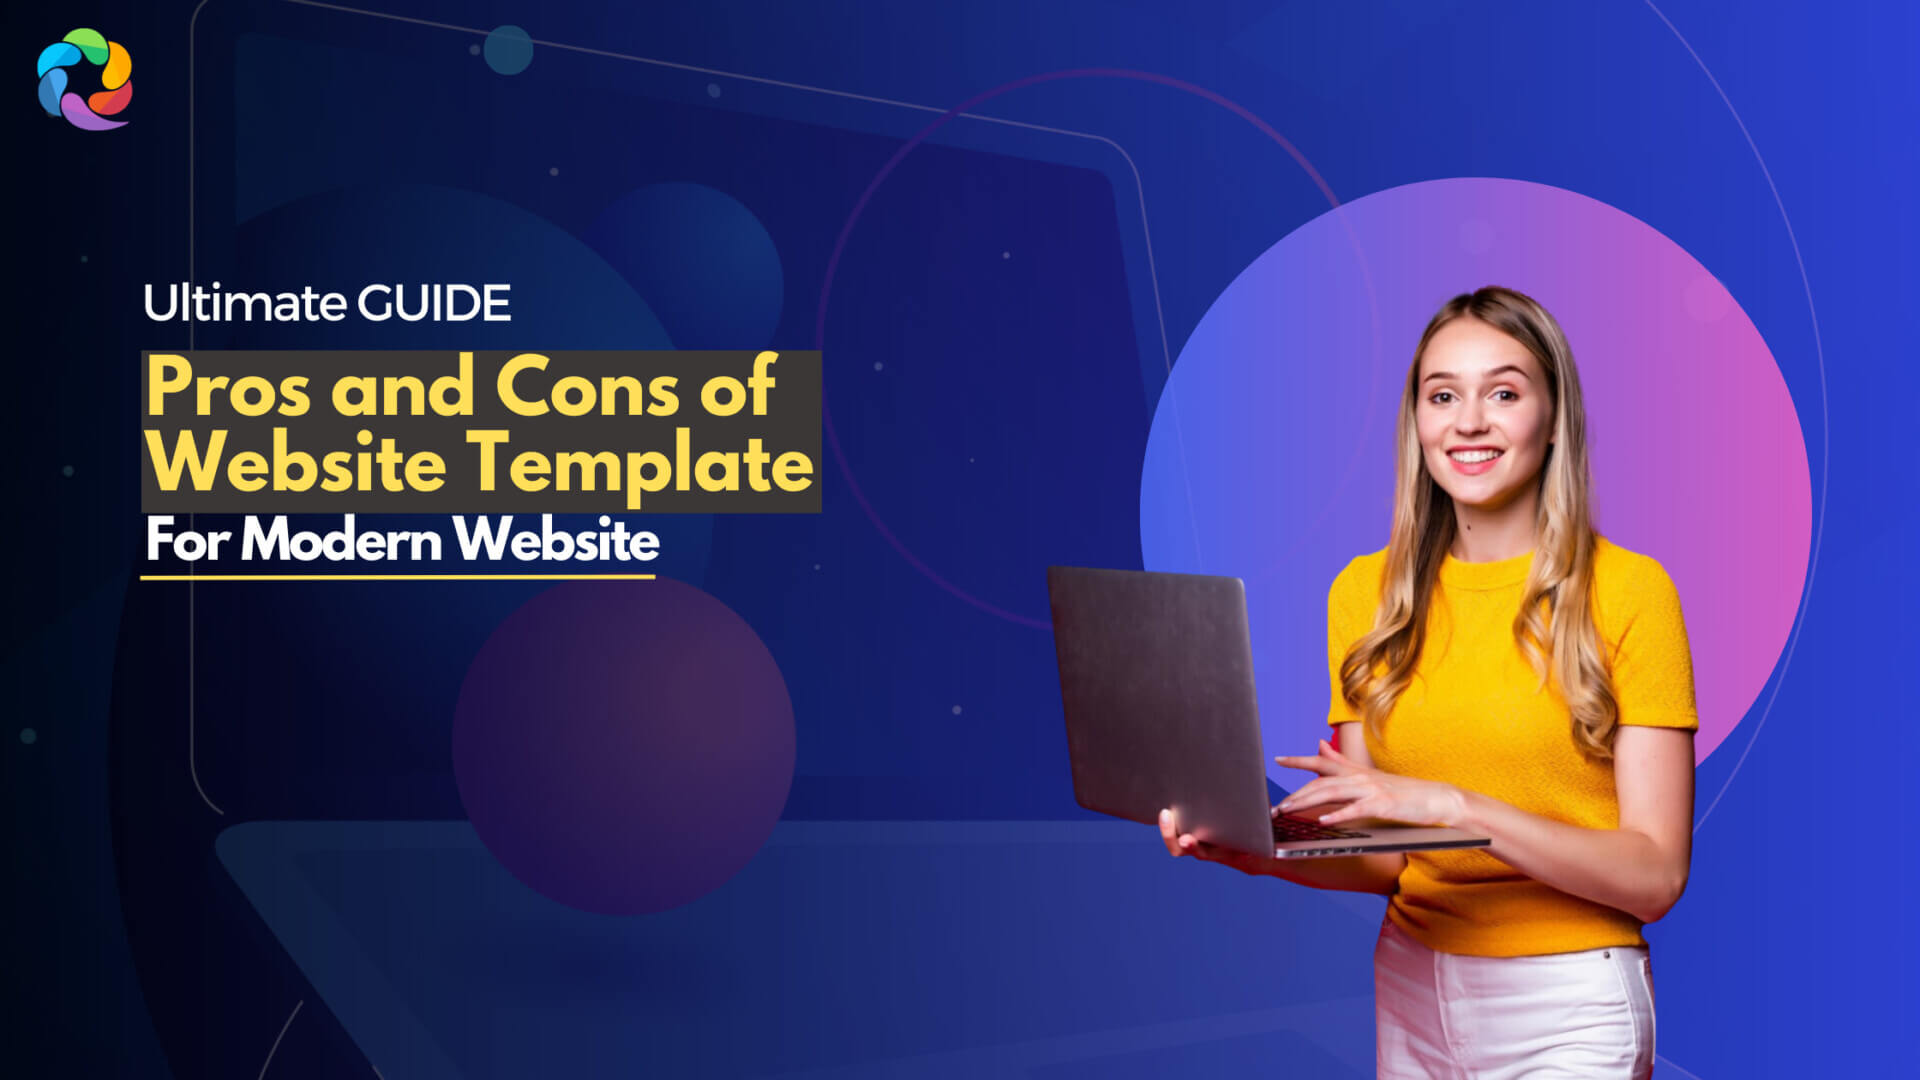 Top Guide: Pros and Cons of Web Design Templates by qortechno.com